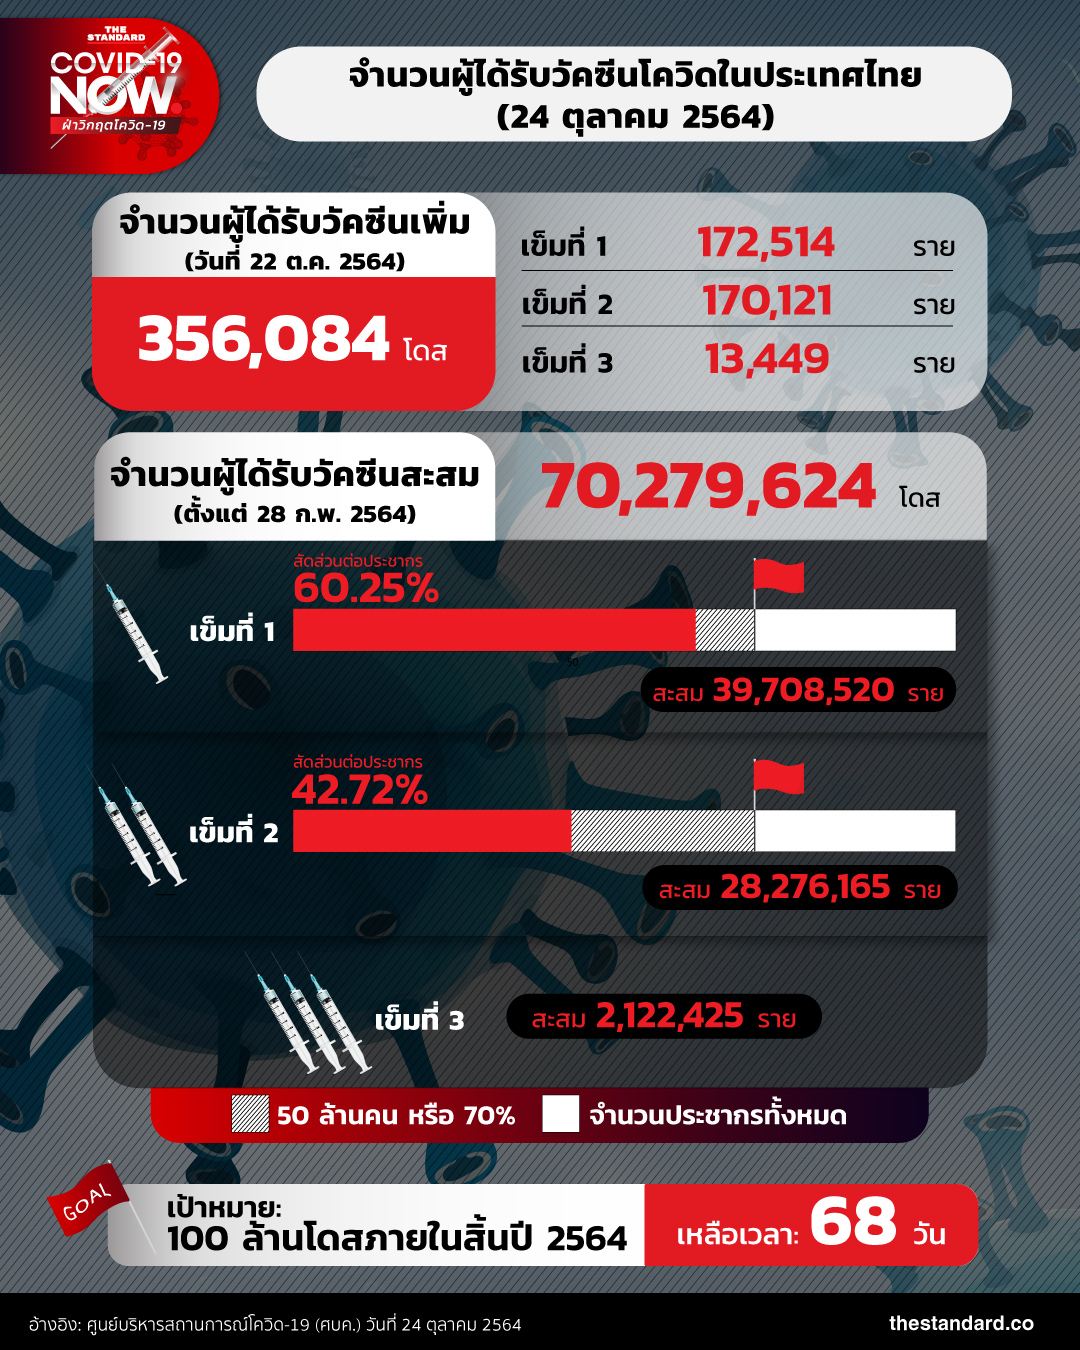 number-of-people-got-covid-19-vaccines-in-thailand-241064